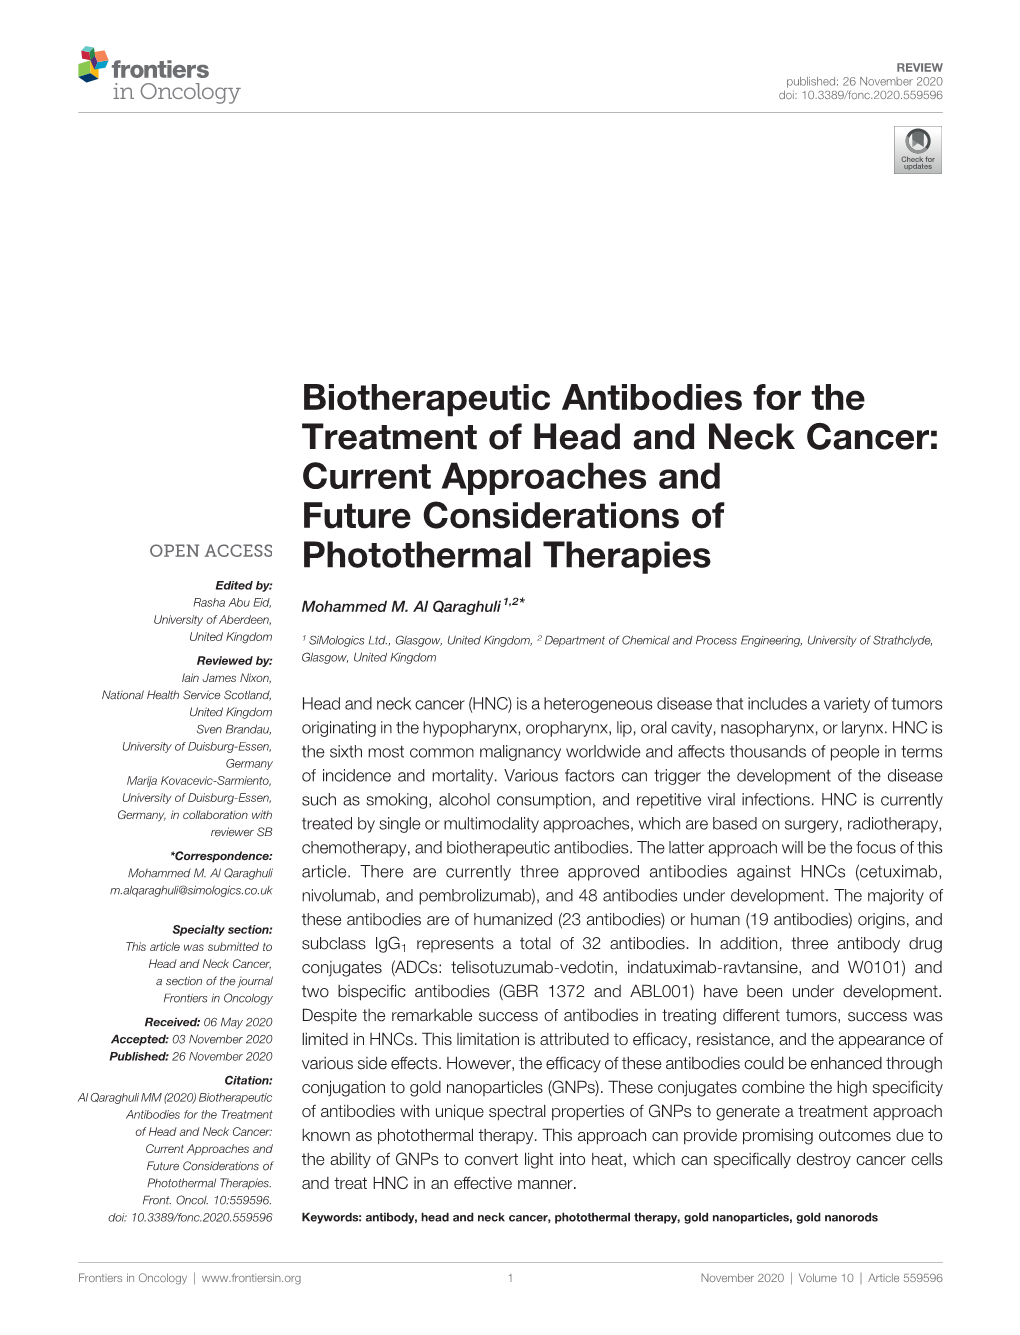 Biotherapeutic Antibodies for the Treatment of Head and Neck Cancer